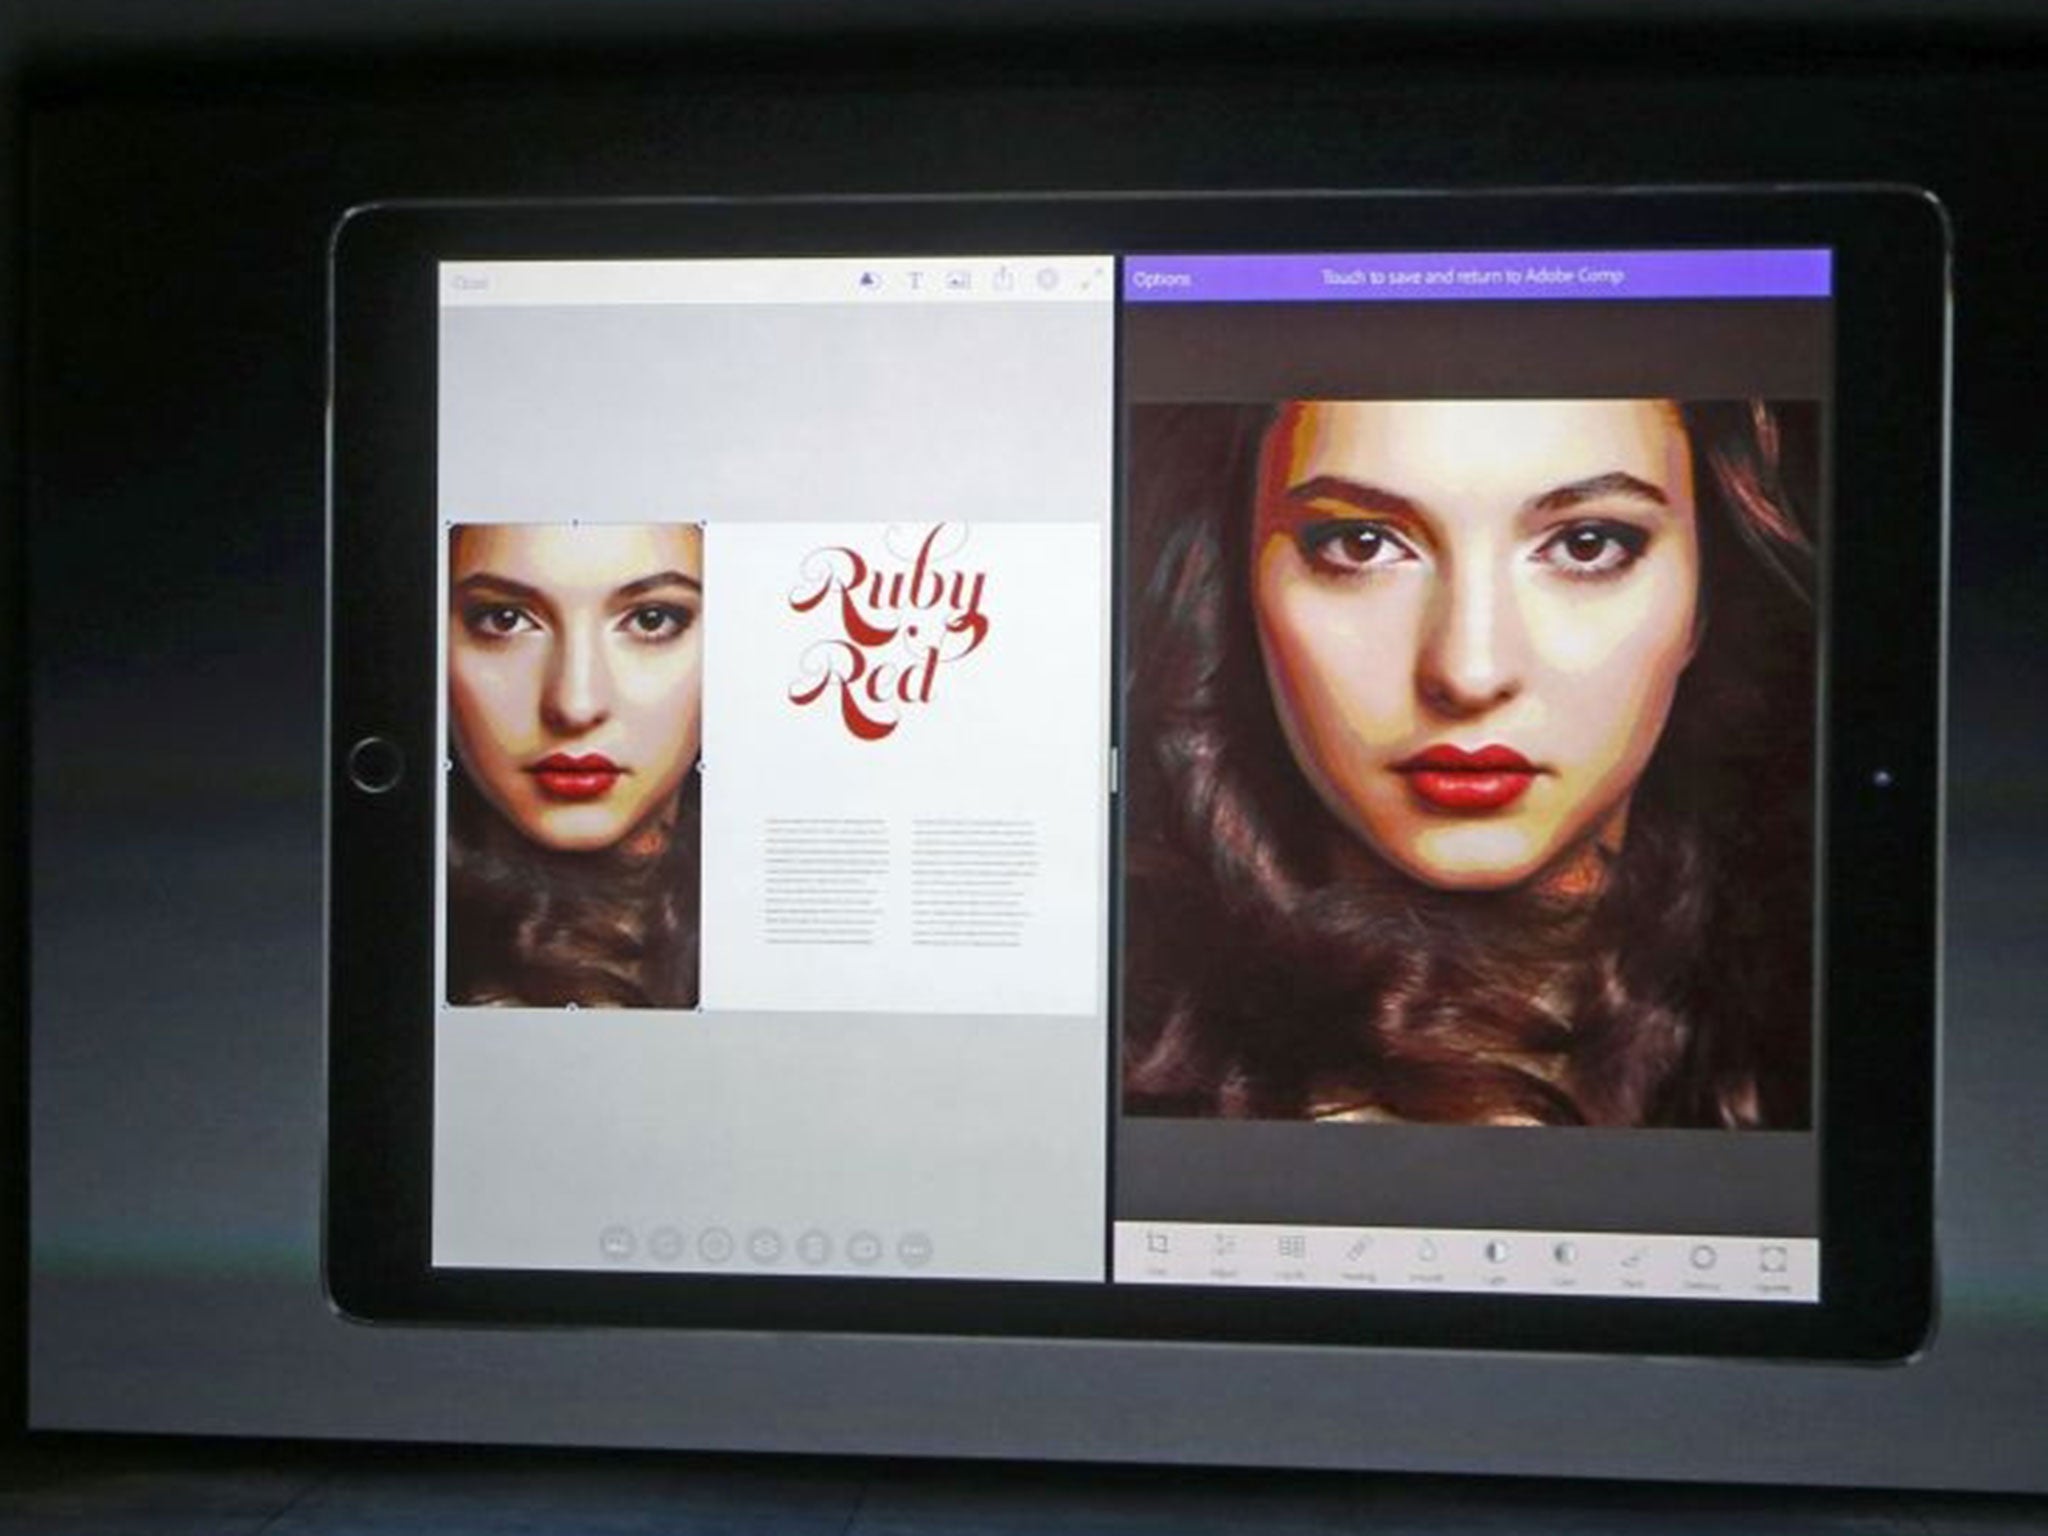 Adobe software is shown on the new iPad Pro during an Apple media event in San Francisco